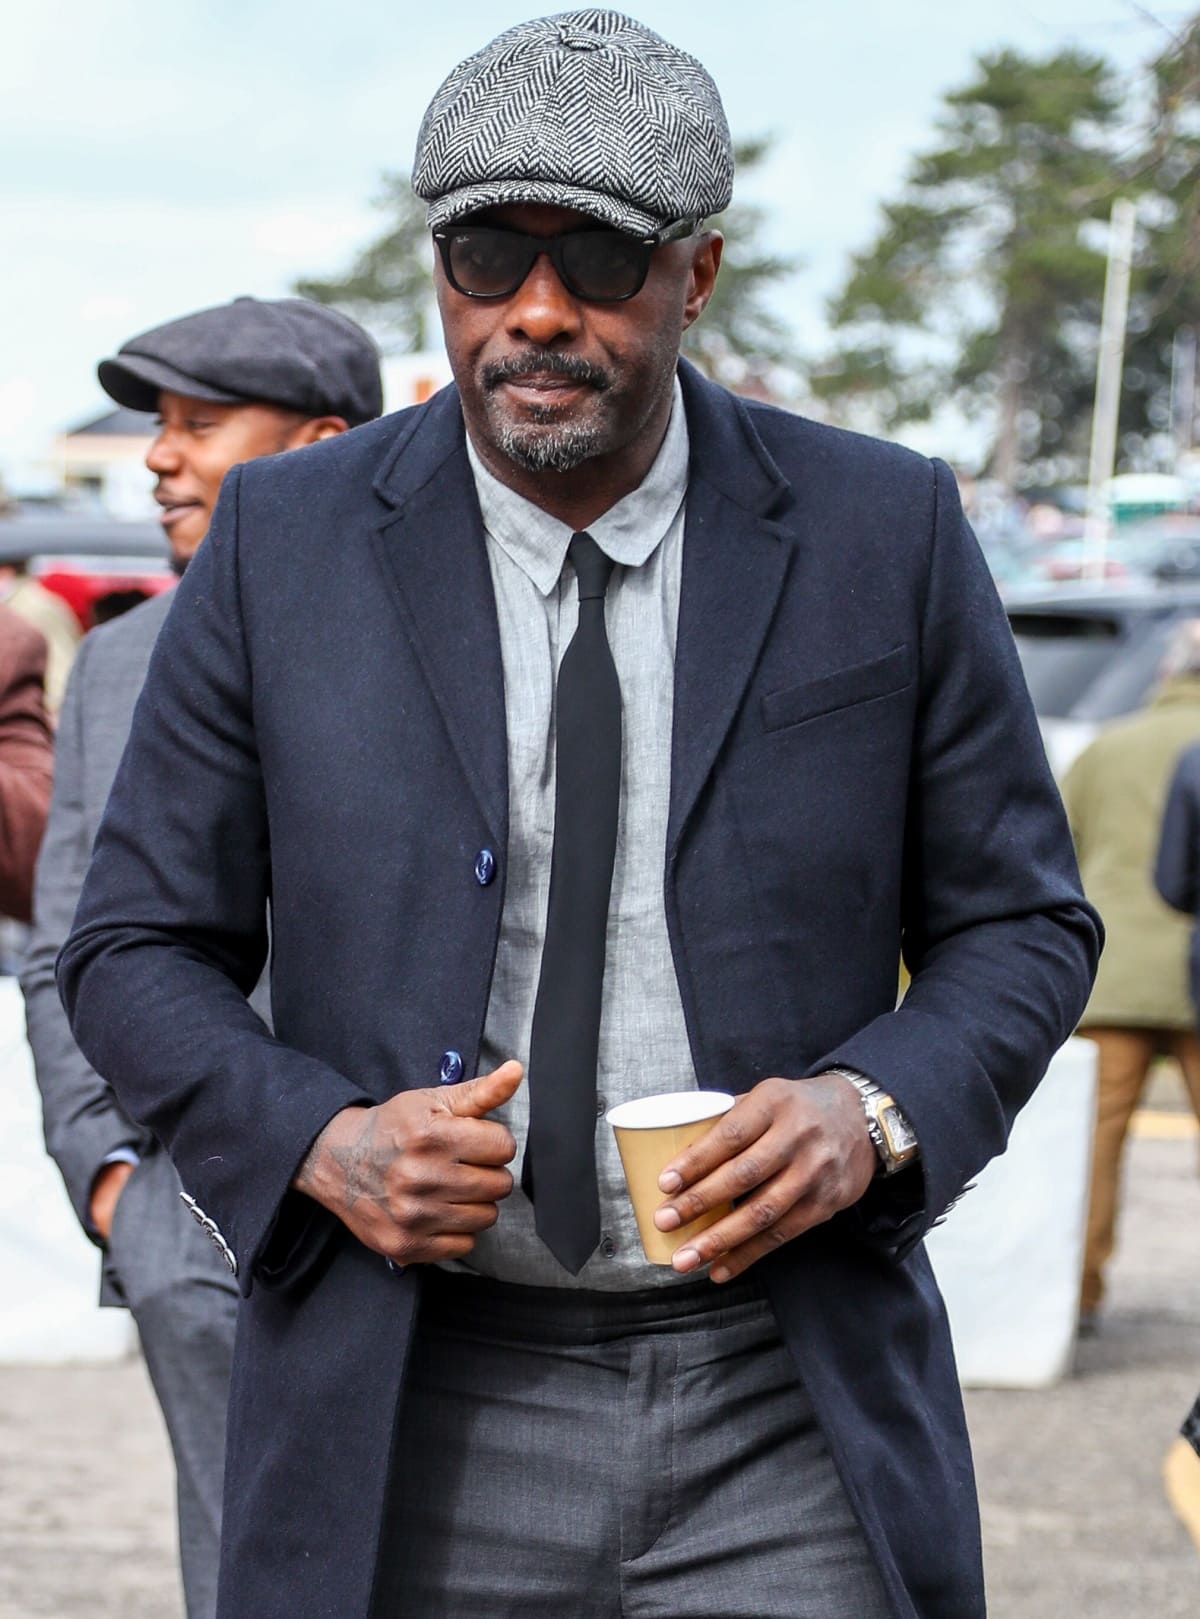 Idris Elba has been married twice before finally meeting the love of his life, Sabrina Dhowre